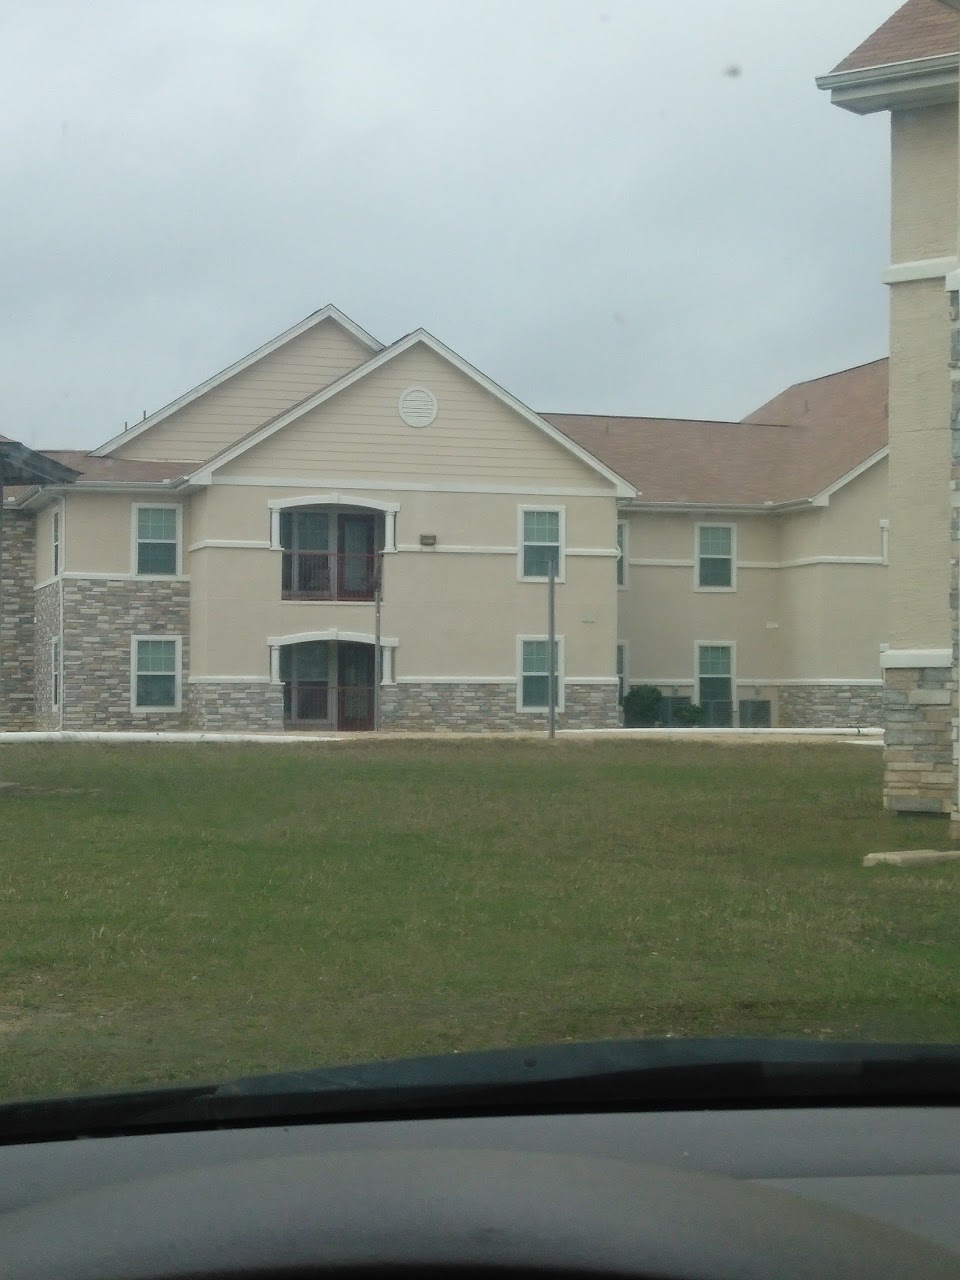 Photo of TAYLOR HEIGHTS APTS at 2313 OLD MOBILE AVE PASCAGOULA, MS 39567